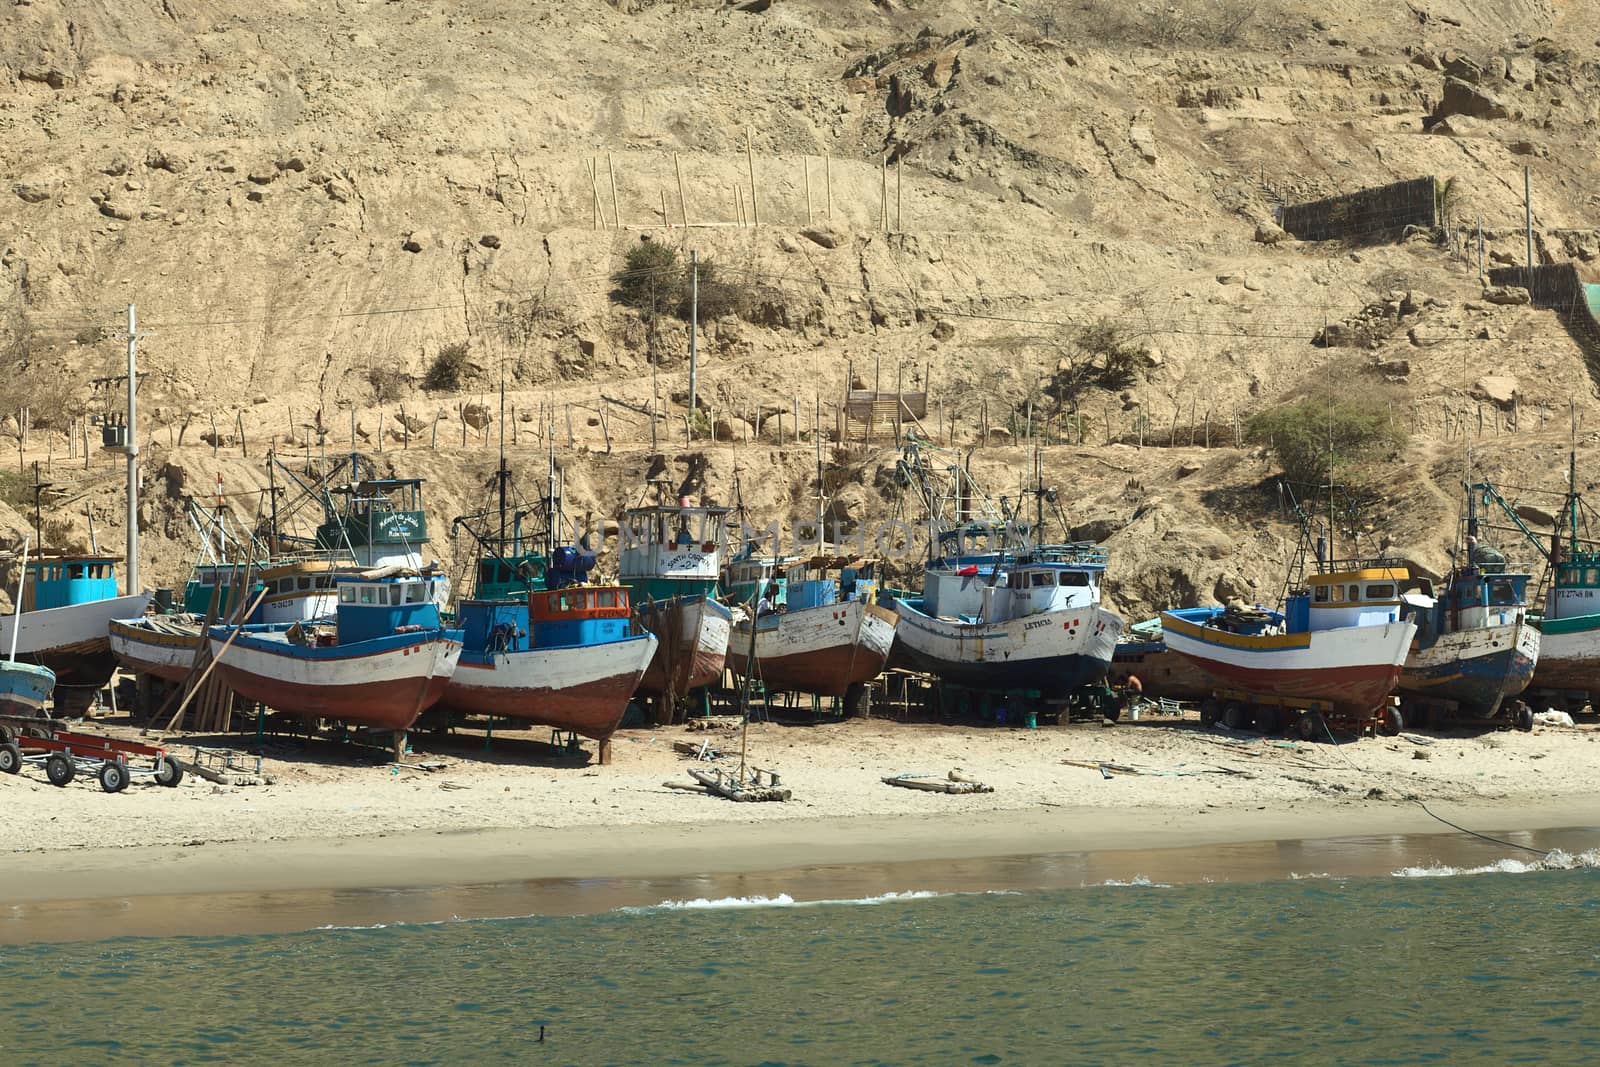 MANCORA, PERU - AUGUST 17, 2013: Old wooden fishing boats and some rafts on the sandy beach on August 17, 2013 in Mancora, Peru. Mancora is a small town in Northern Peru living from fishing and tourism.